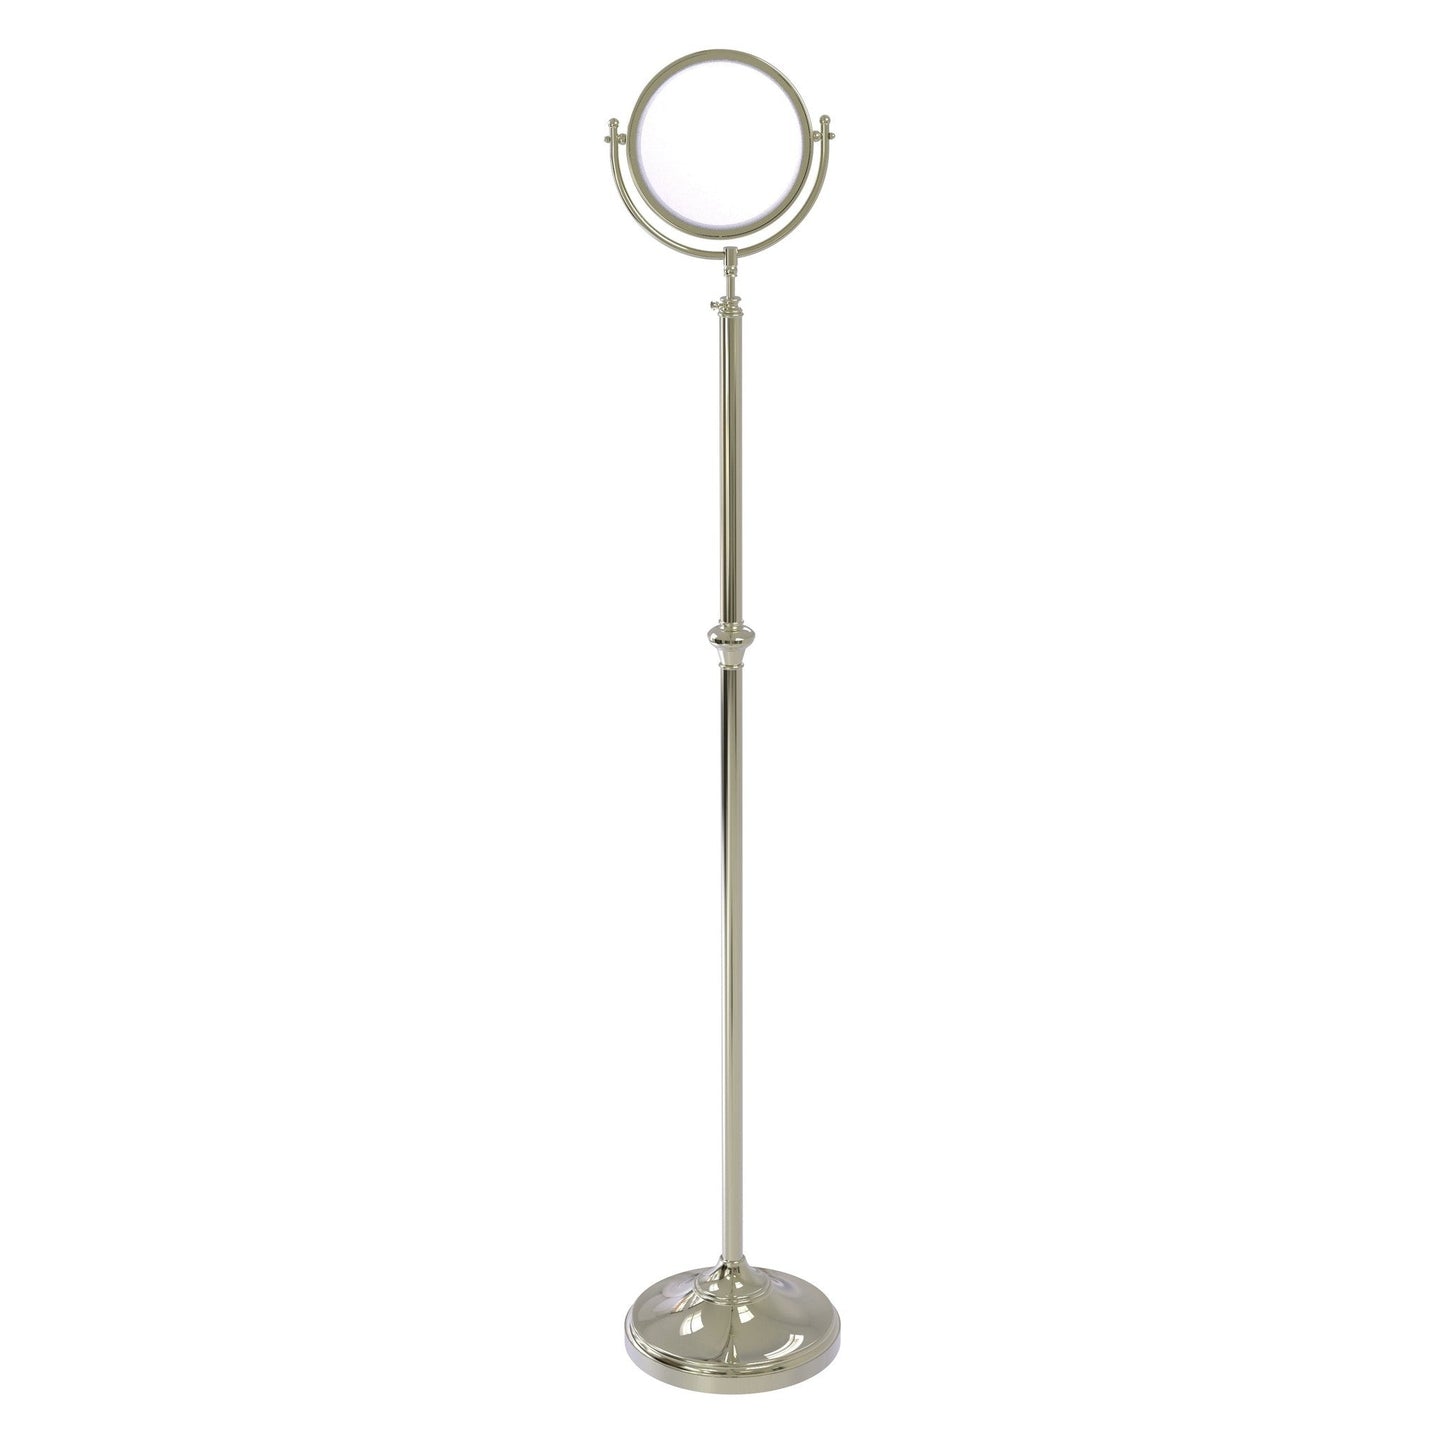 Allied Brass DMF-2/2X 10.5" x 10.5" Polished Nickel Solid Brass Adjustable Height Floor Standing Make-Up Mirror With 2X Magnification